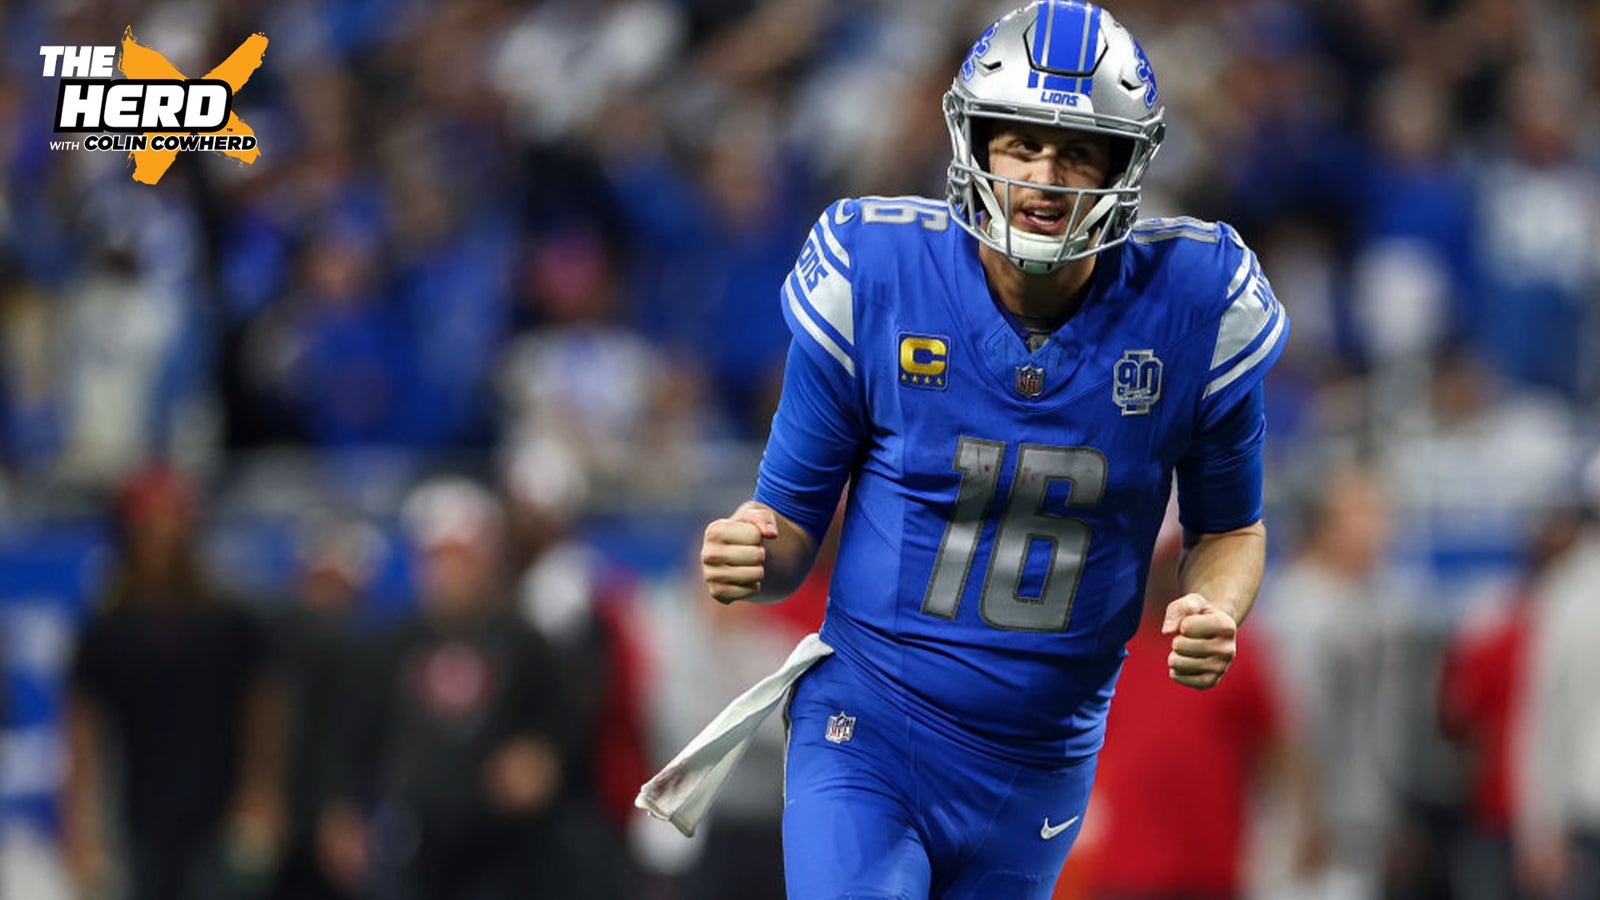 How the Lions are simply a good team, not a Cinderella team